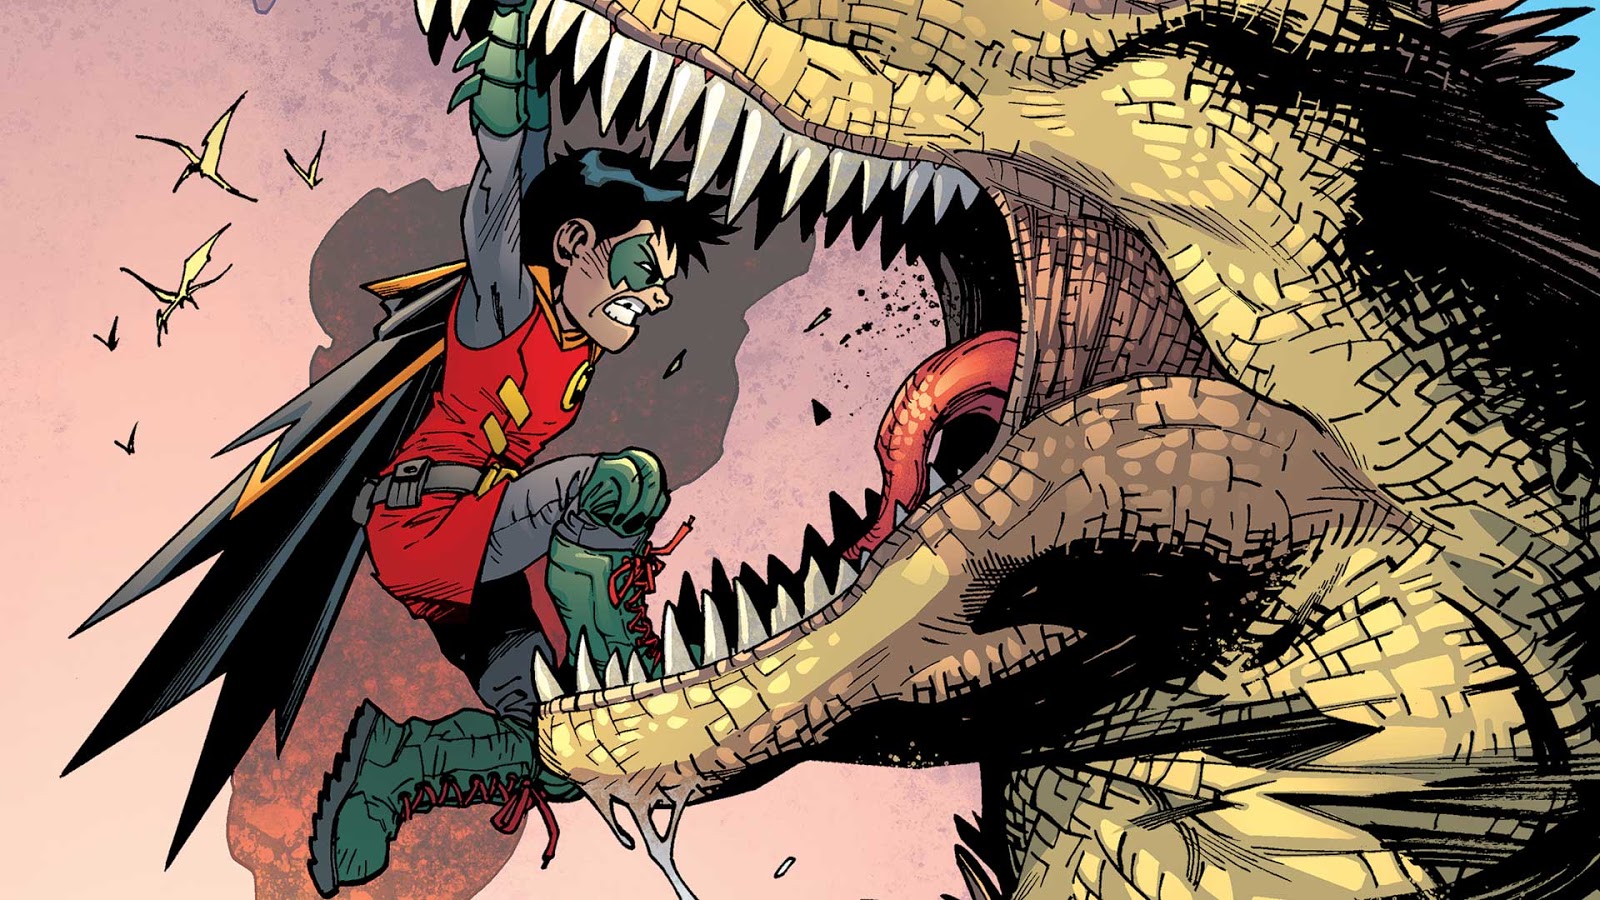 Weird Science DC Comics: Robin: Son of Batman #12 Review and *SPOILERS*